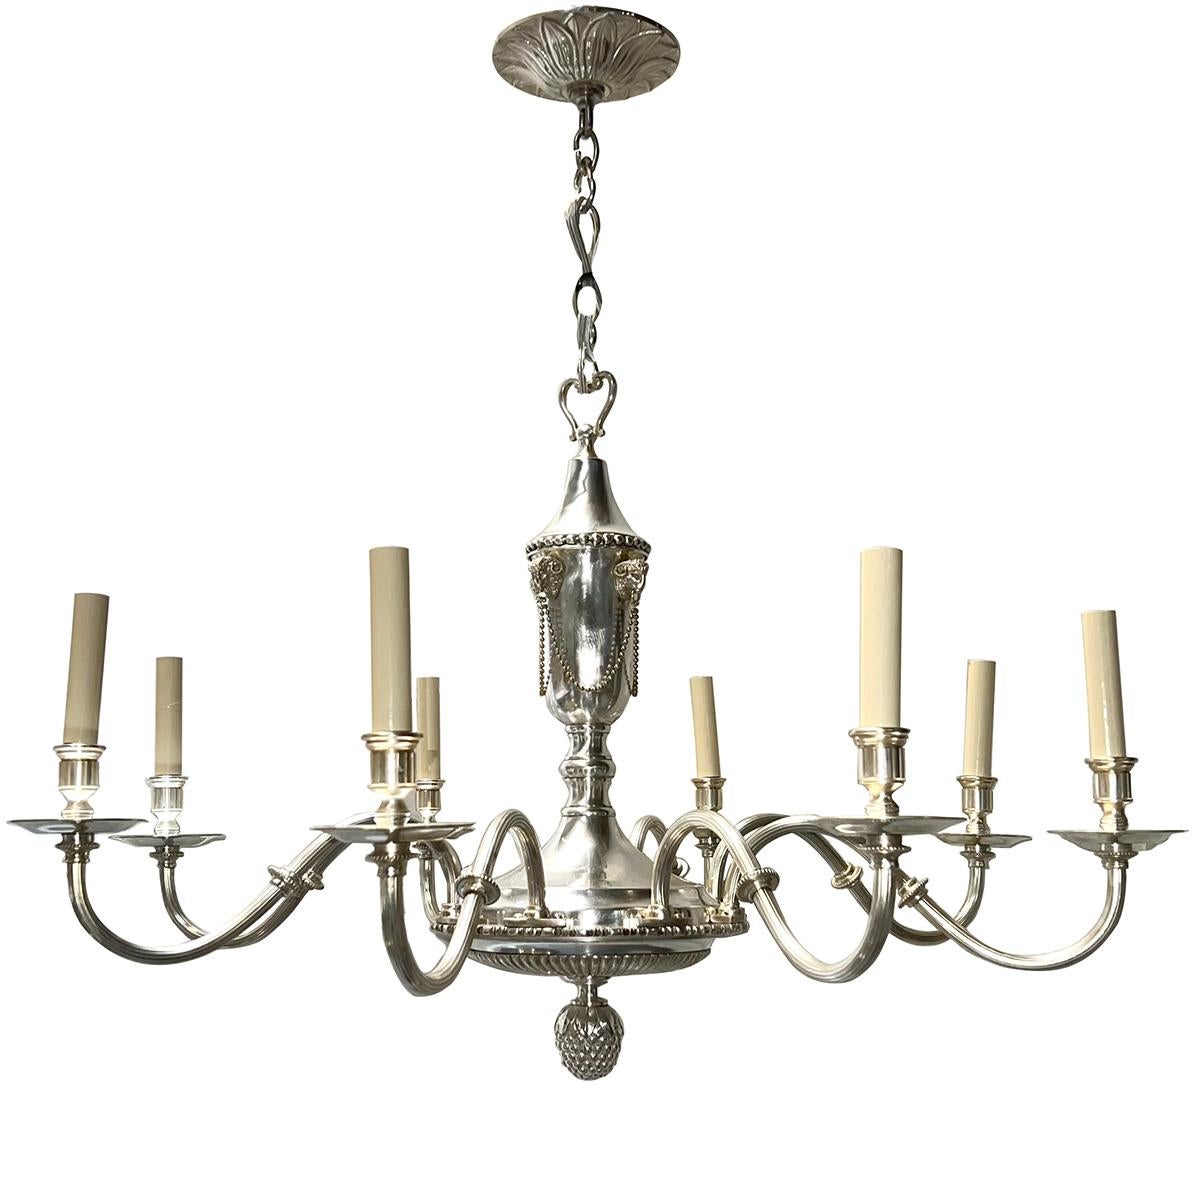 A circa 1920 English silver plated chandelier with original finish, with 8 lights.

Measurements:
Diameter: 34